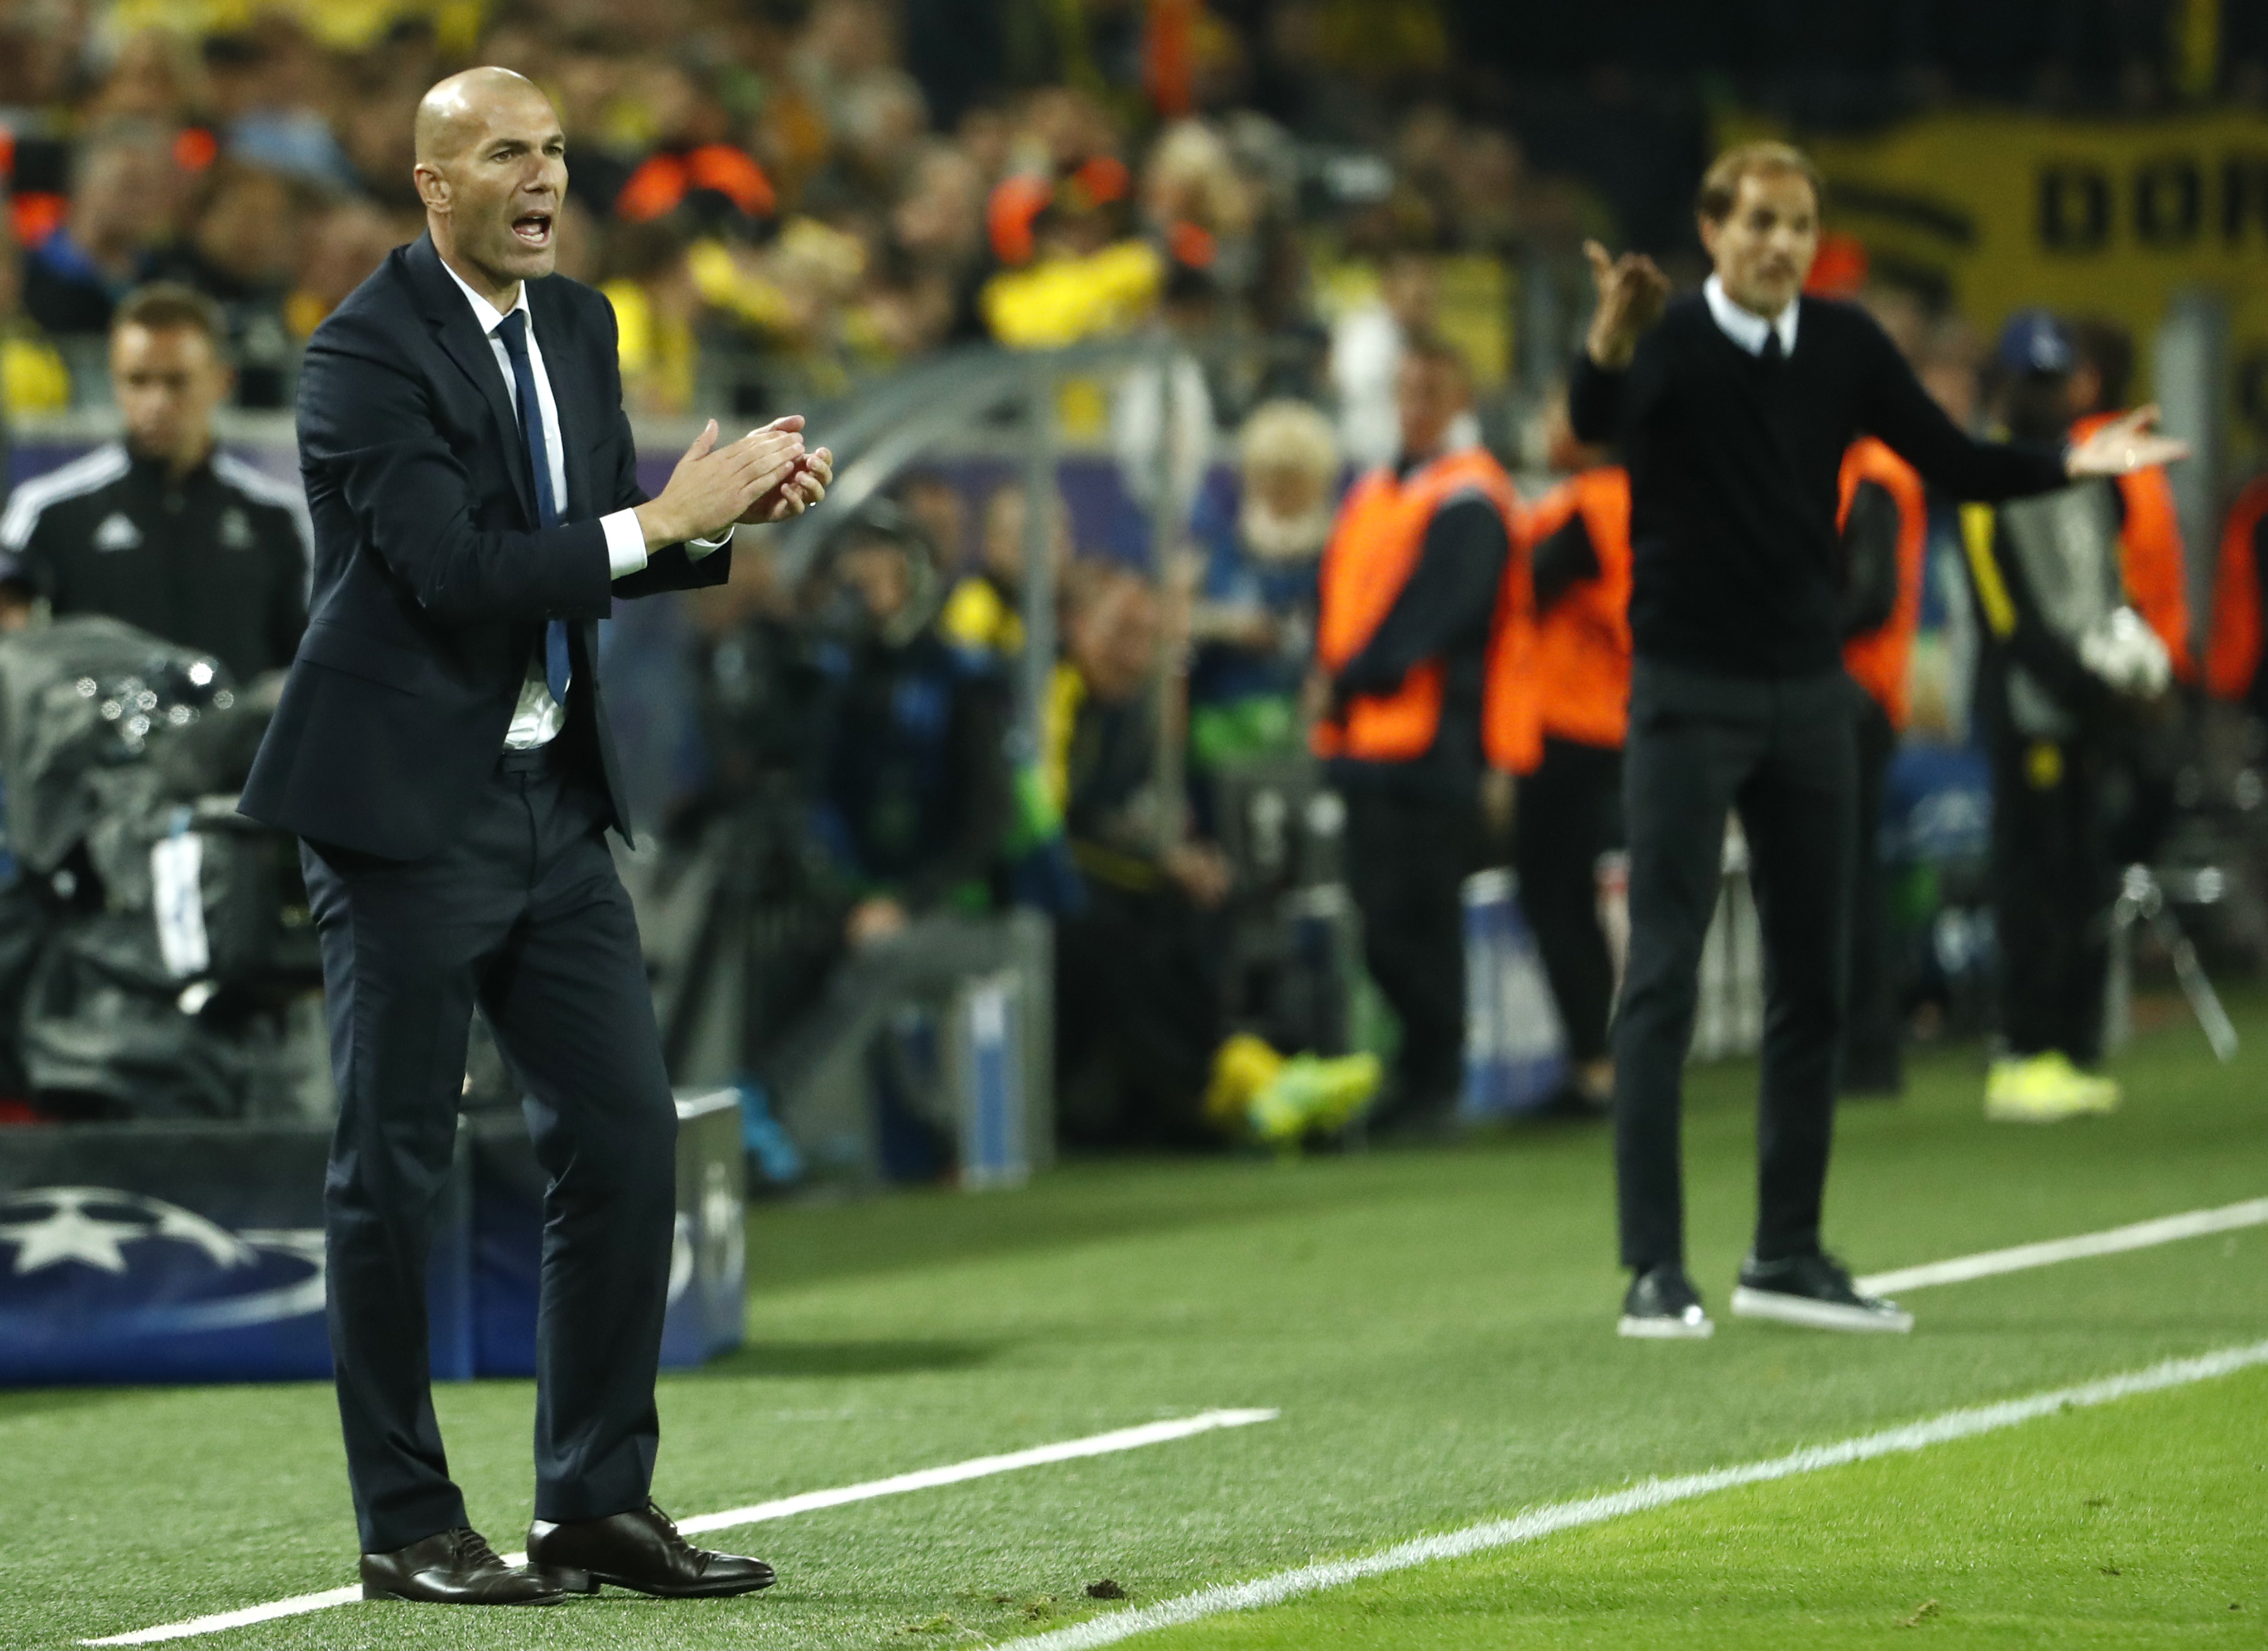 Real Madrid's French coach Zinedine Zidane (C) and Dortmund's head coach Thomas Tuchel (R) react during the UEFA Champions League first leg football match between Borussia Dortmund and Real Madrid at BVB stadium in Dortmund, on September 27, 2016. / AFP / Odd ANDERSEN        (Photo credit should read ODD ANDERSEN/AFP via Getty Images)